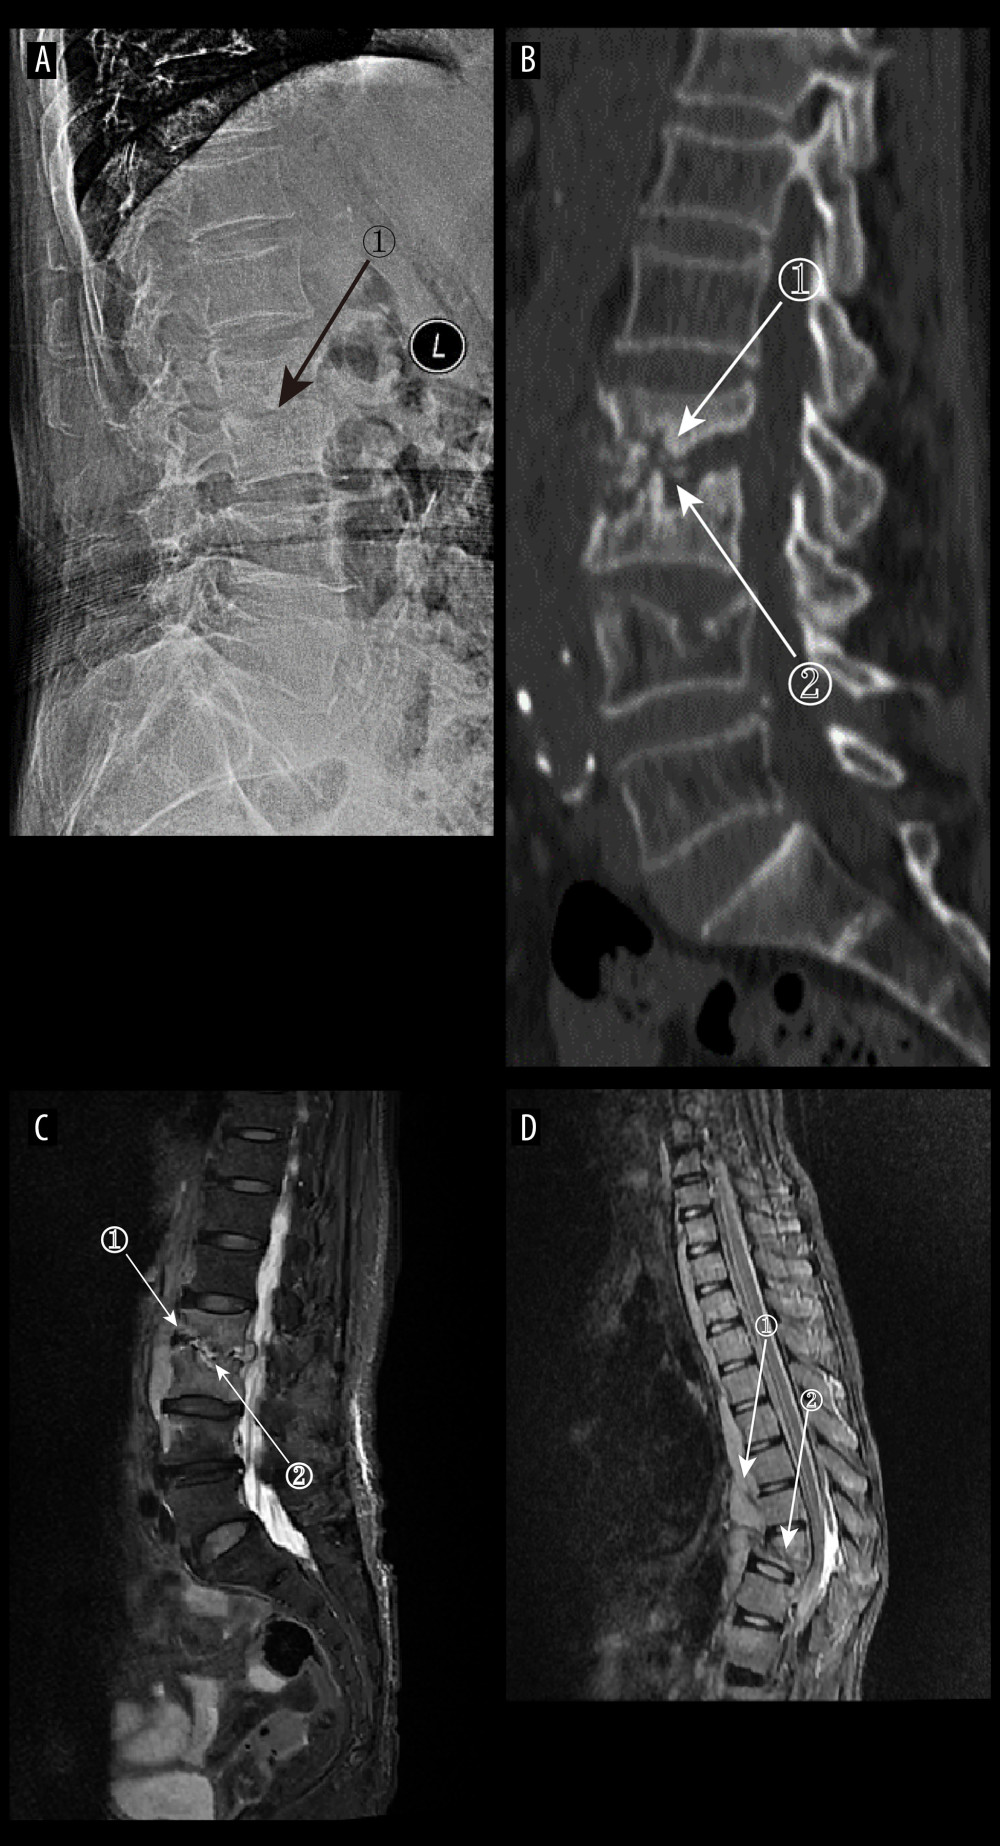 (A) Plain radiographs of late tuberculous spondylitis (TS). Marker 1 shows narrowing of the L2–3 intervertebral space, dysmorphism of the L2 vertebral body, and osteophytes on the margins. (A–C) Images of the same patient, with an interval of 210 days between the onset of the disease and the radiographs. (B) Plain computed tomography in late-stage TS. Markers 1 and 2 show severe bone destruction at the lower edge of the L2 vertebral body and the upper edge of the L3 vertebral body, narrowing of the L2–3 intervertebral space, and free osteolysis. (C) Magnetic resonance imaging (MRI) of late TS. Marker 1 shows abnormal signal in the paravertebral region, and marker 2 shows bone destruction at the opposite edges of the L2 and L3 vertebrae. (D) MRI of late TS. Marker 1 shows sublimated spreading of an abscess under the anterior longitudinal ligament, and marker 2 shows thoracic vertebral deformity. This is an image of a patient who was approximately 130 days from the onset of symptoms to radiography (Adobe Illustrator 2022. 26.5. Adobe Inc.).